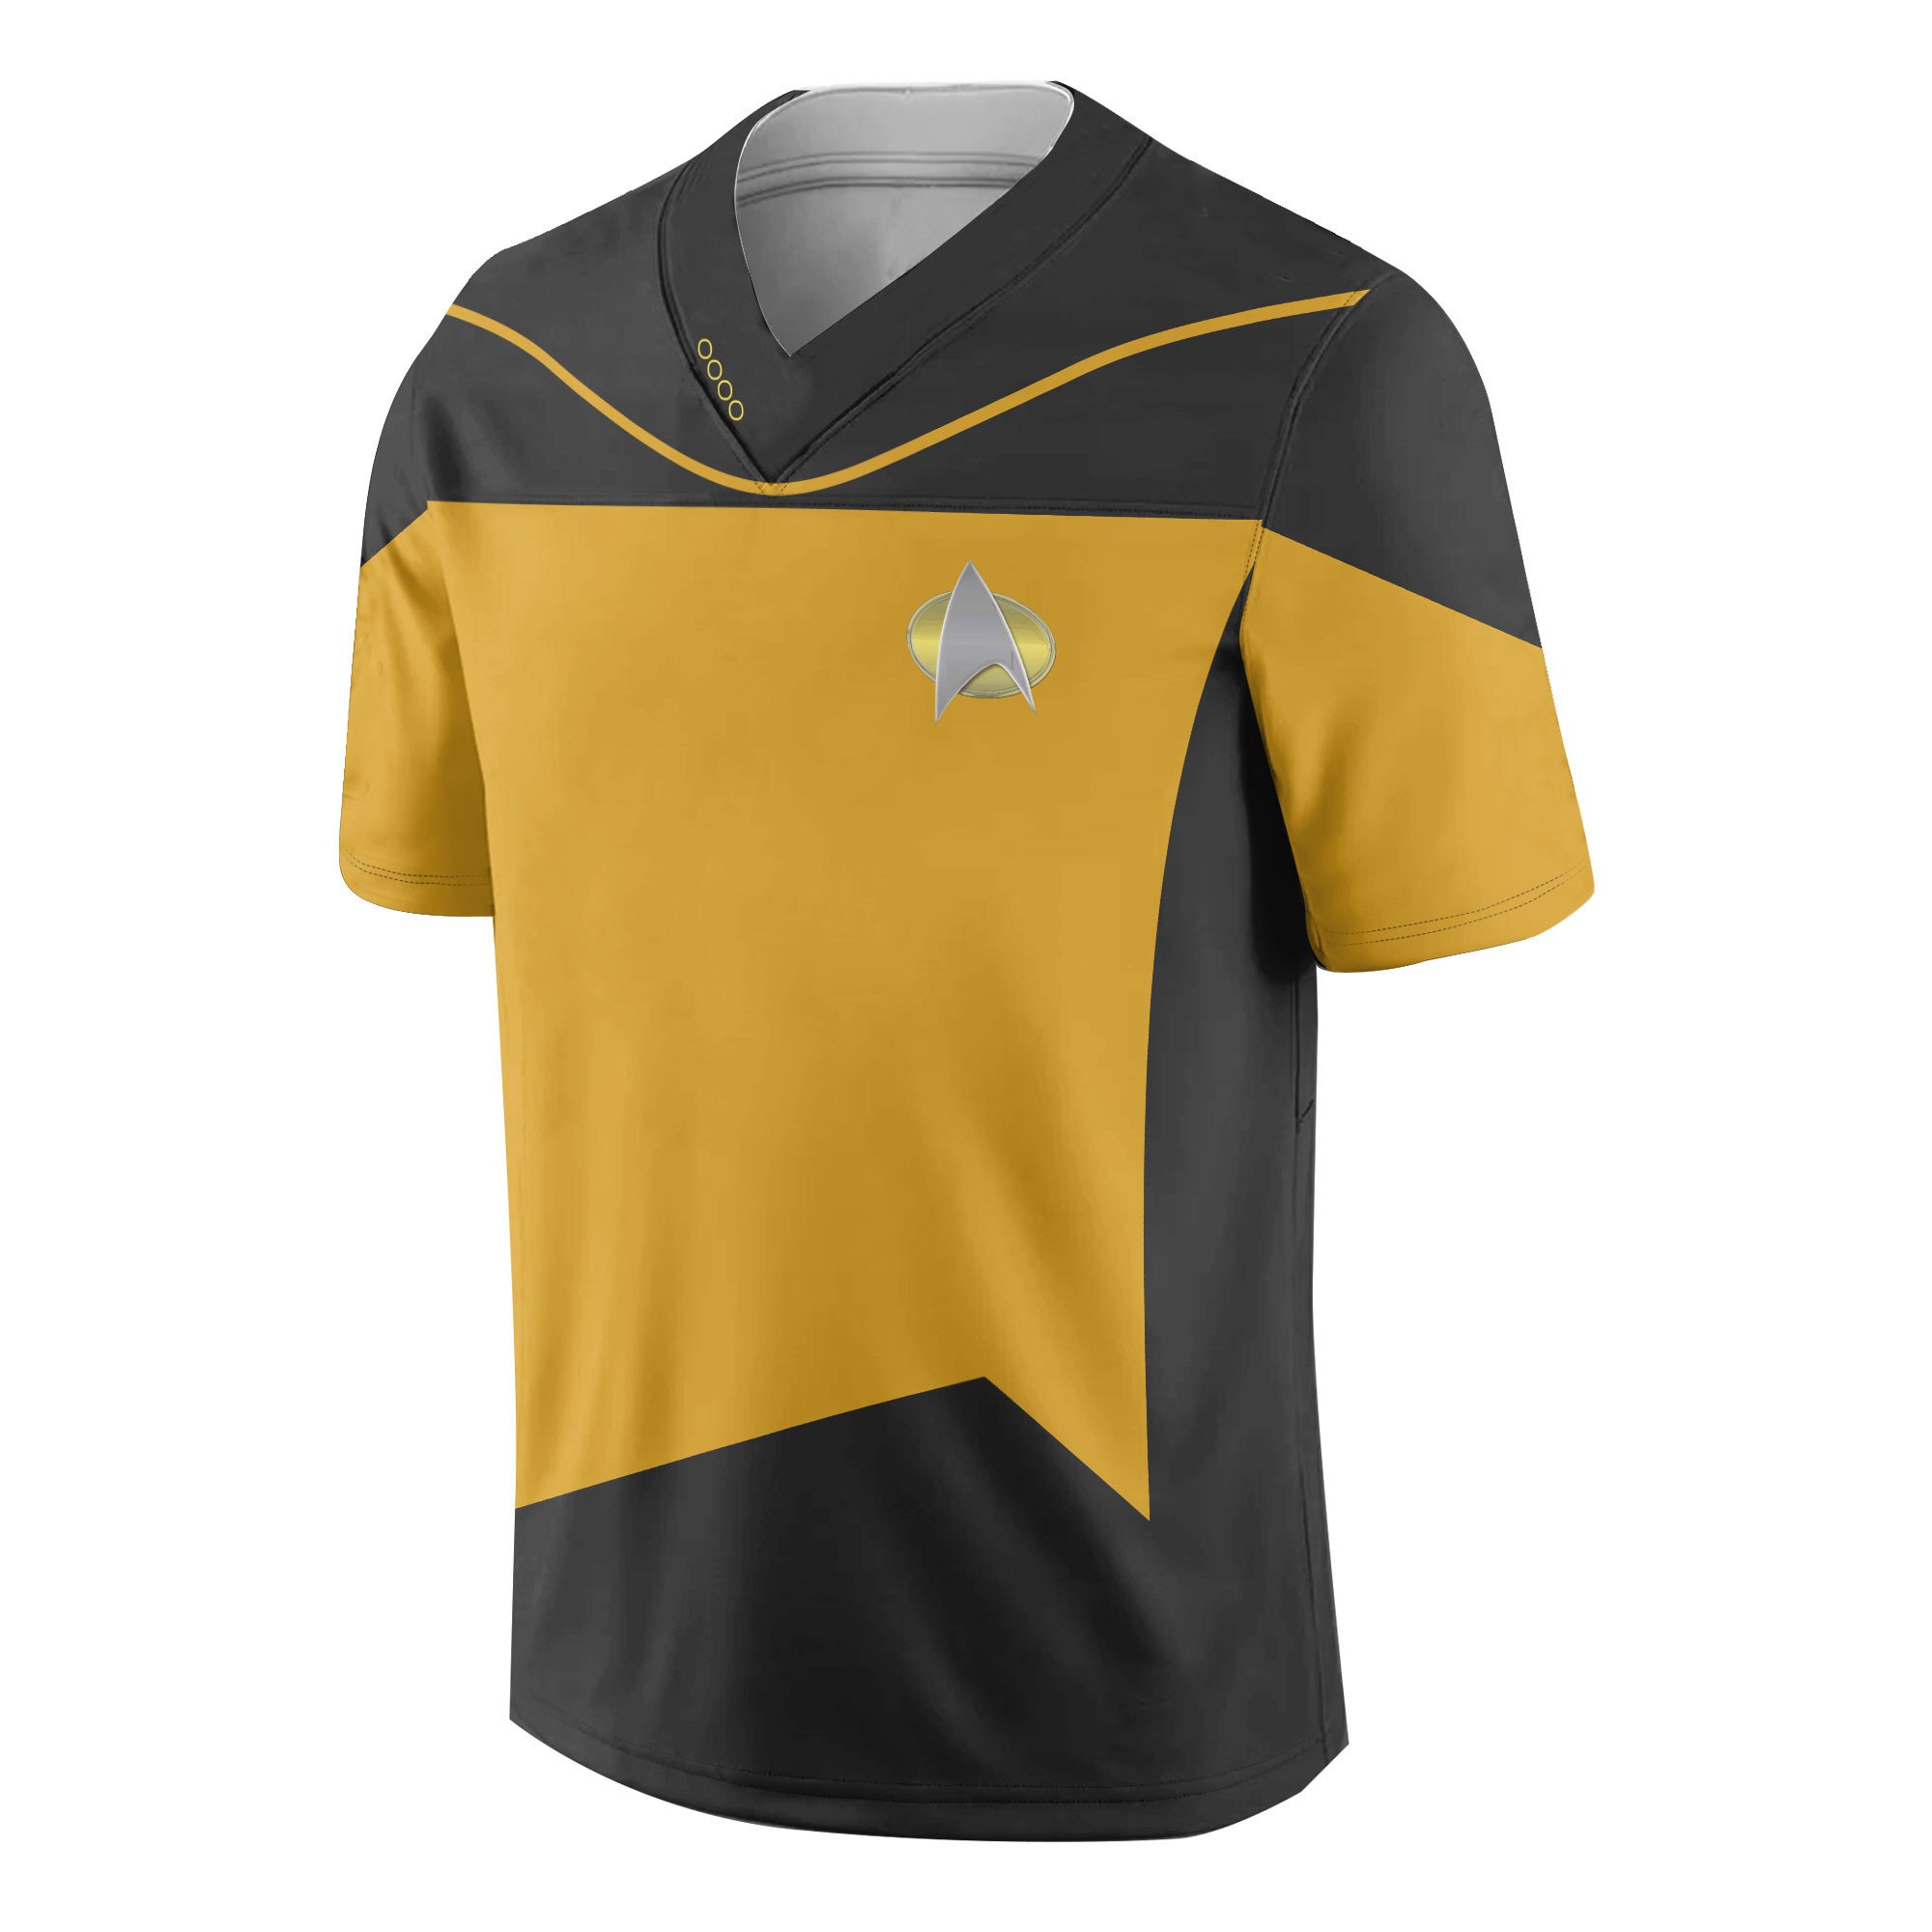 TOP S.T The Next Generation Yellow Version Personalized Custom Football All Over Print Jersey 1